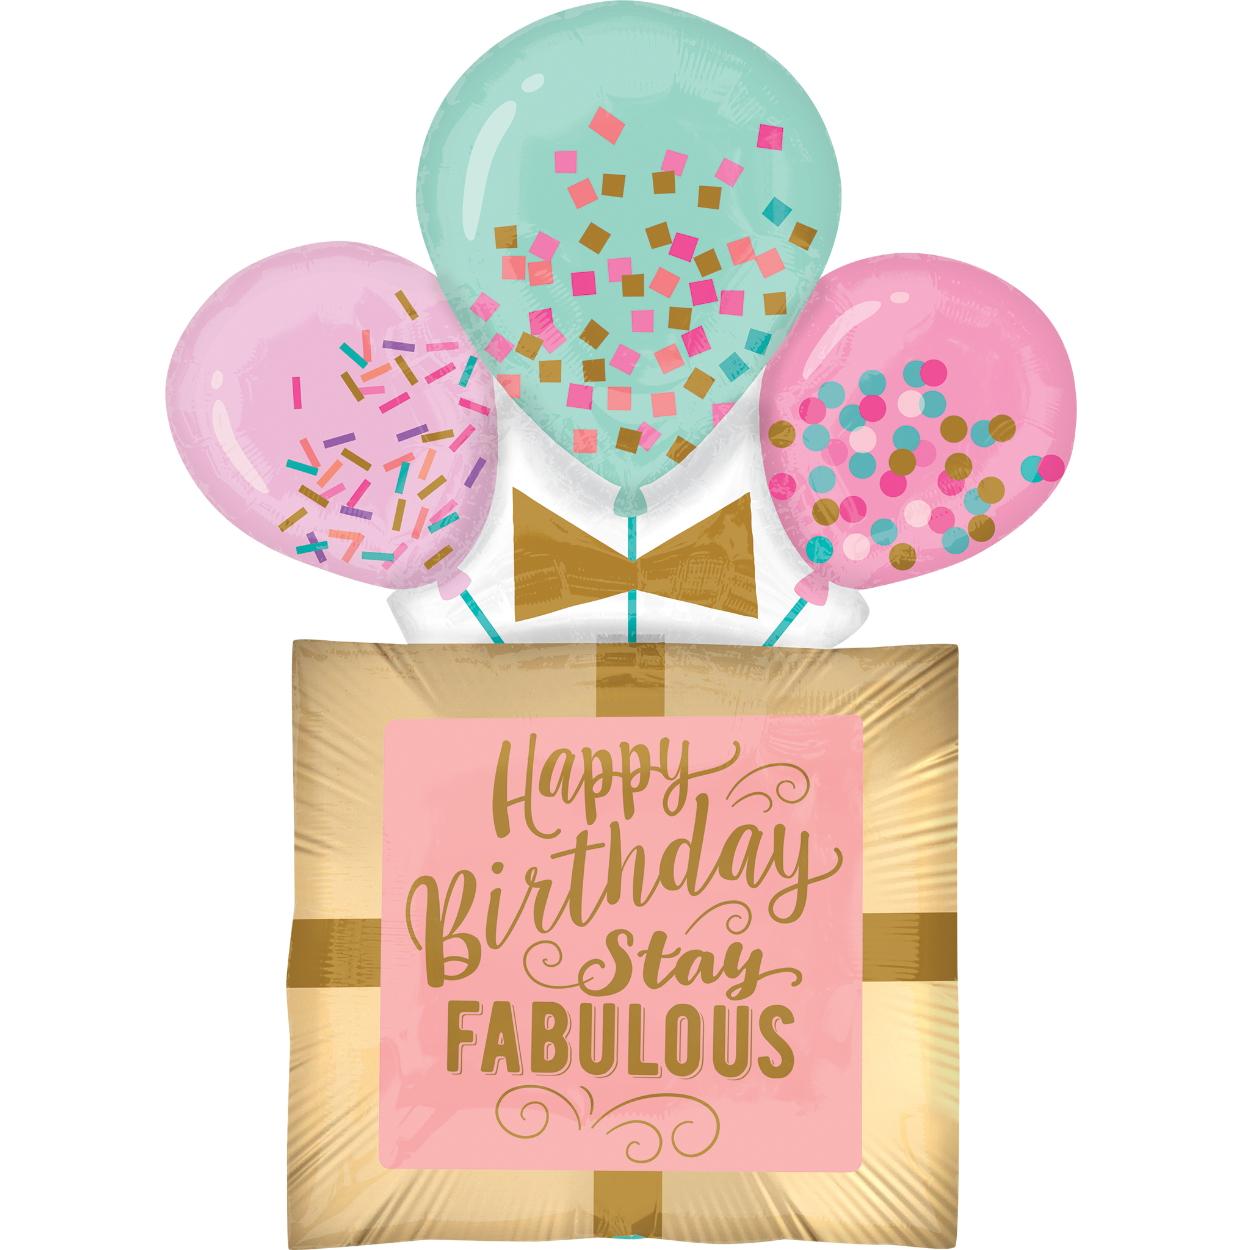 Fabulous Birthday Gift SuperShape Foil Balloon 58x81cm Balloons & Streamers - Party Centre